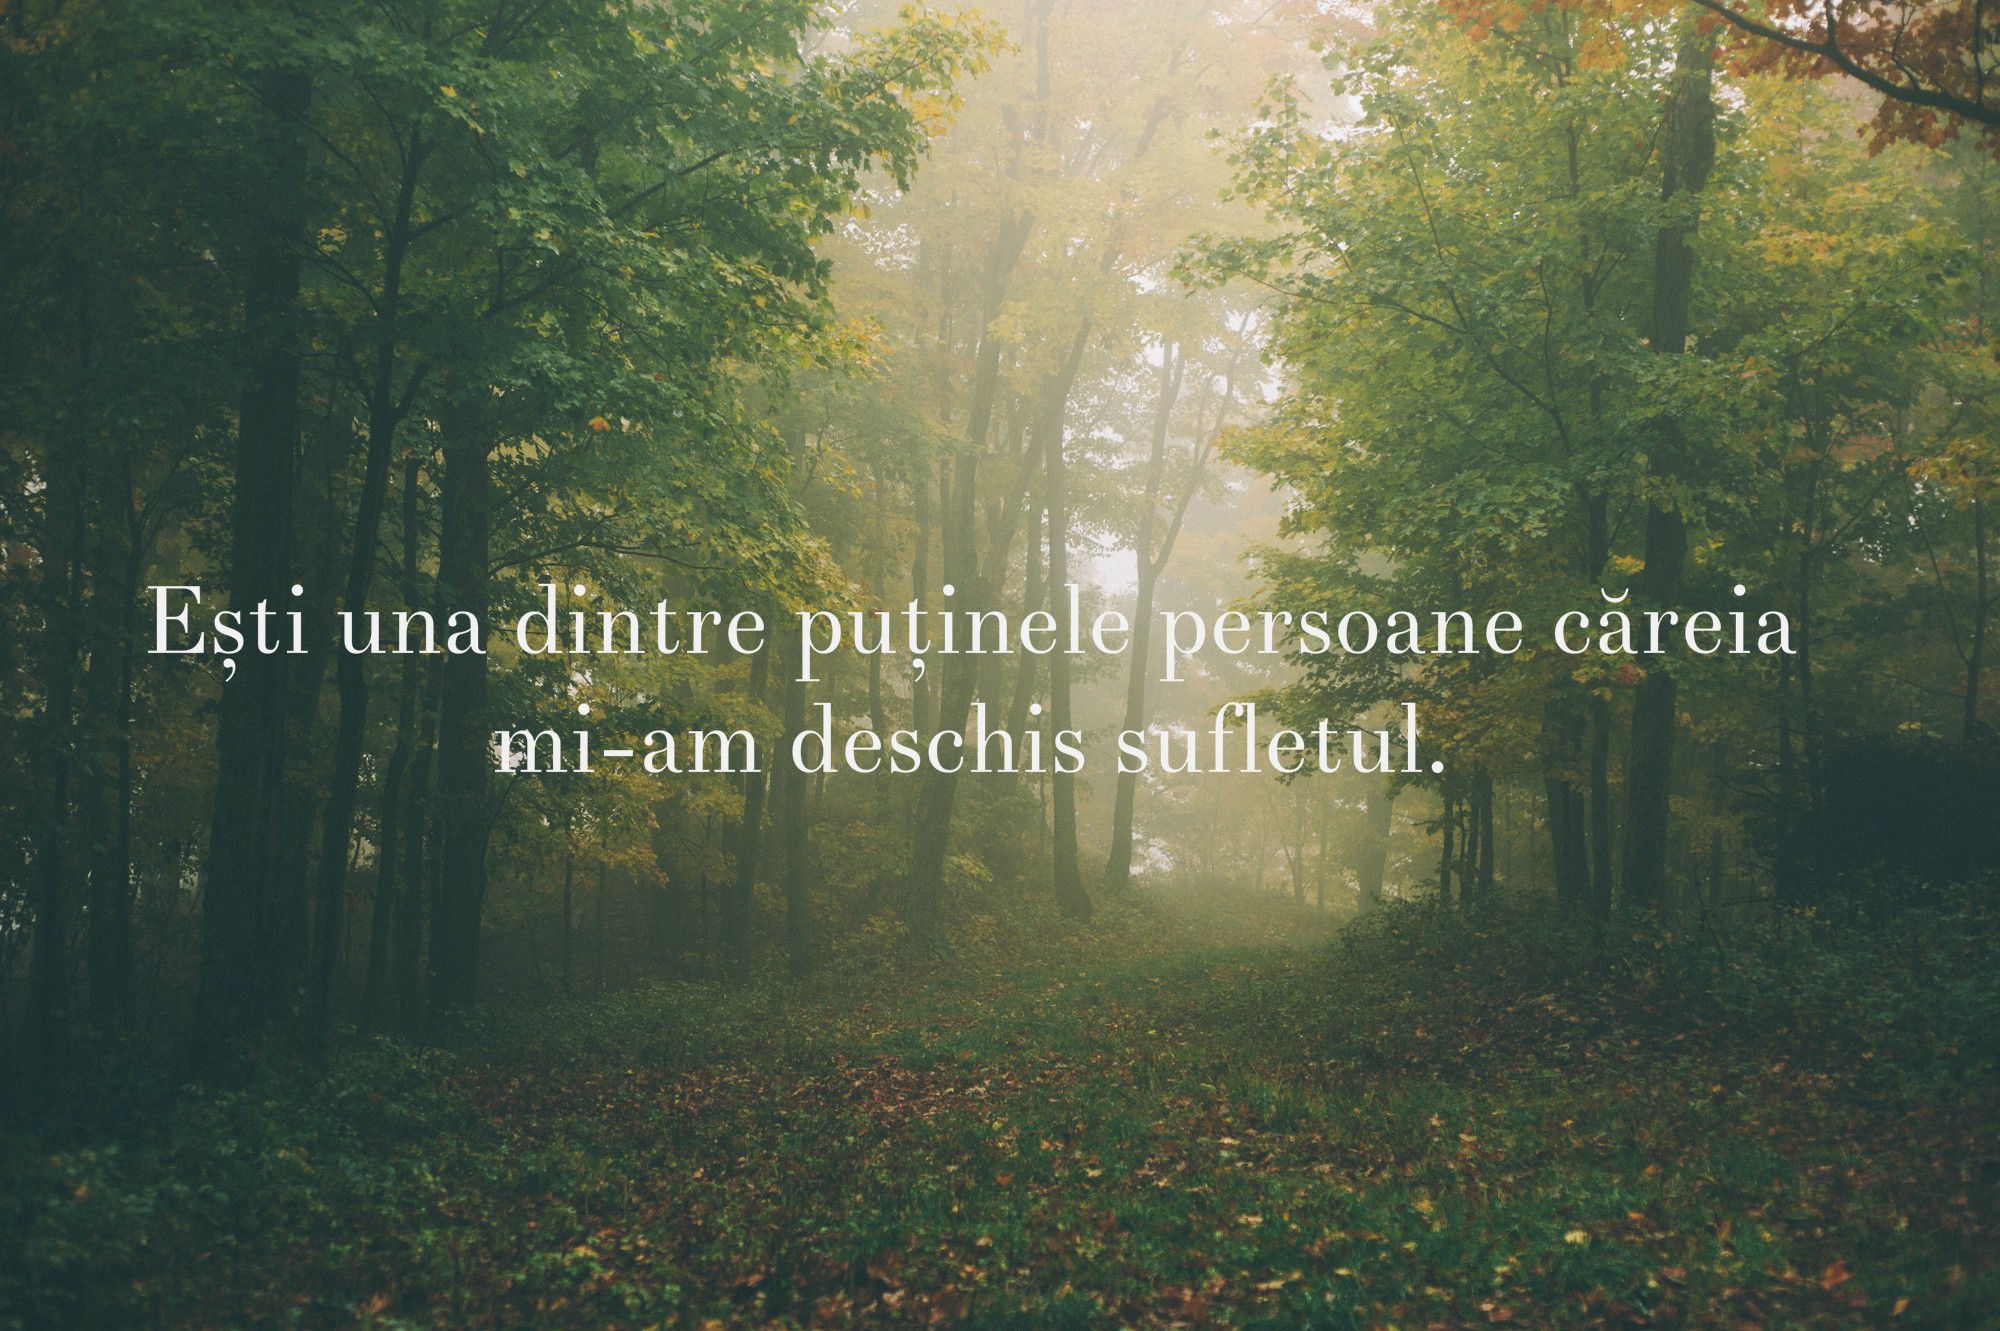 Romanian, Quote, Forest, Sunlight Wallpaper